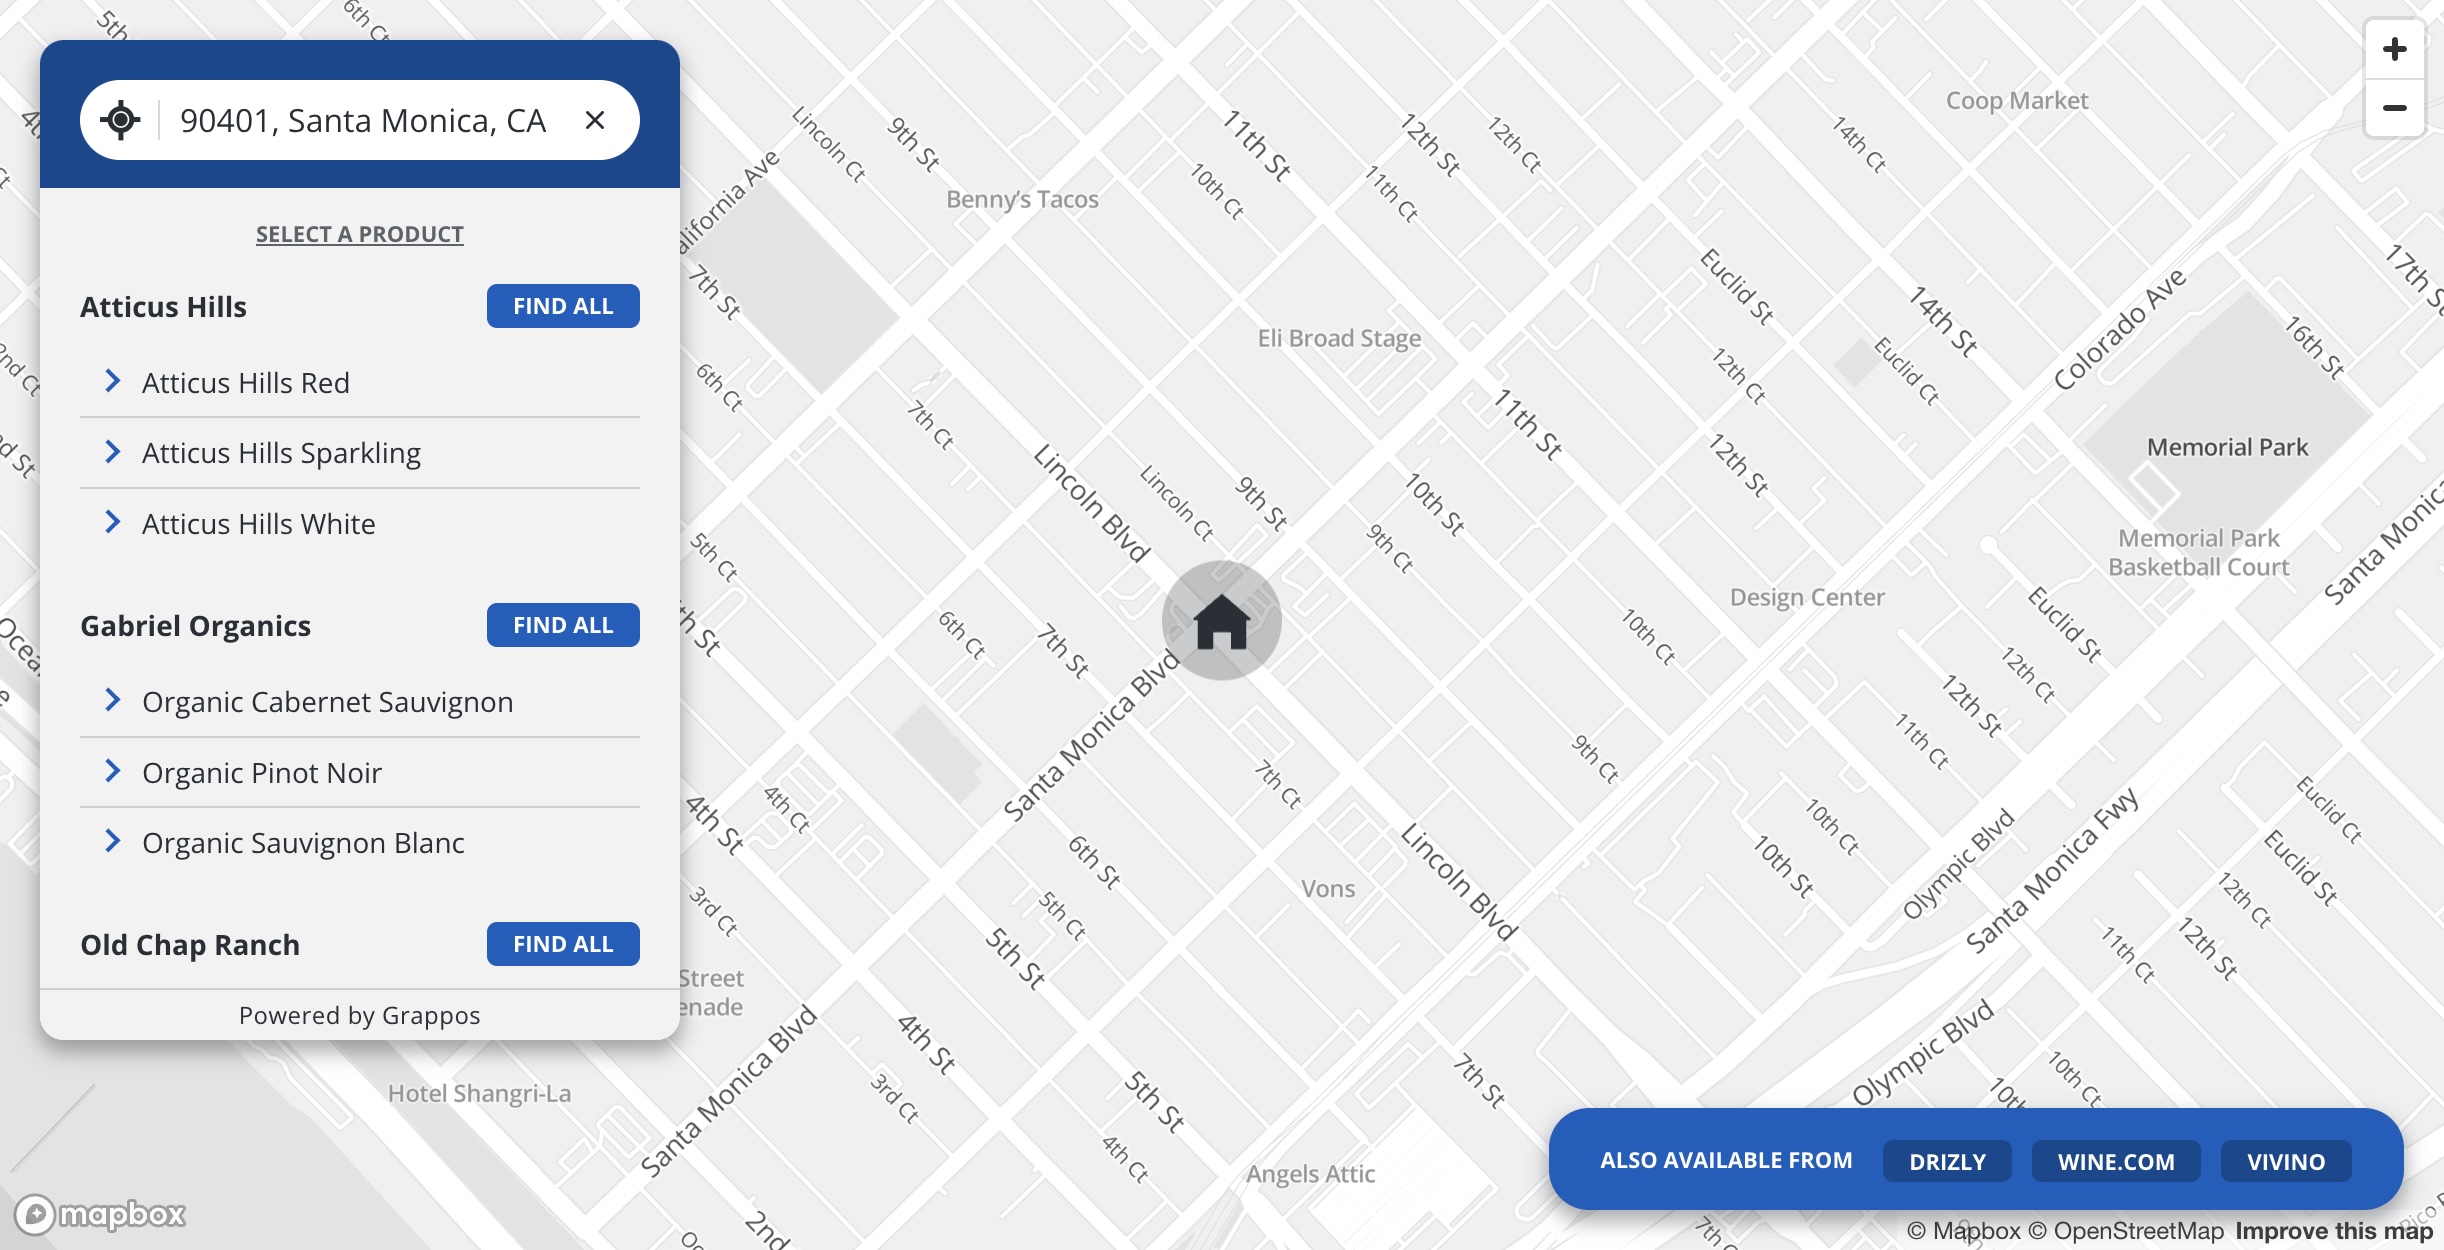 The Grappos locator works as a store locator or a product locator. Users can search by brand, product and location. The optional 'online retailers' feature enables linking to delivery services and online retailers.